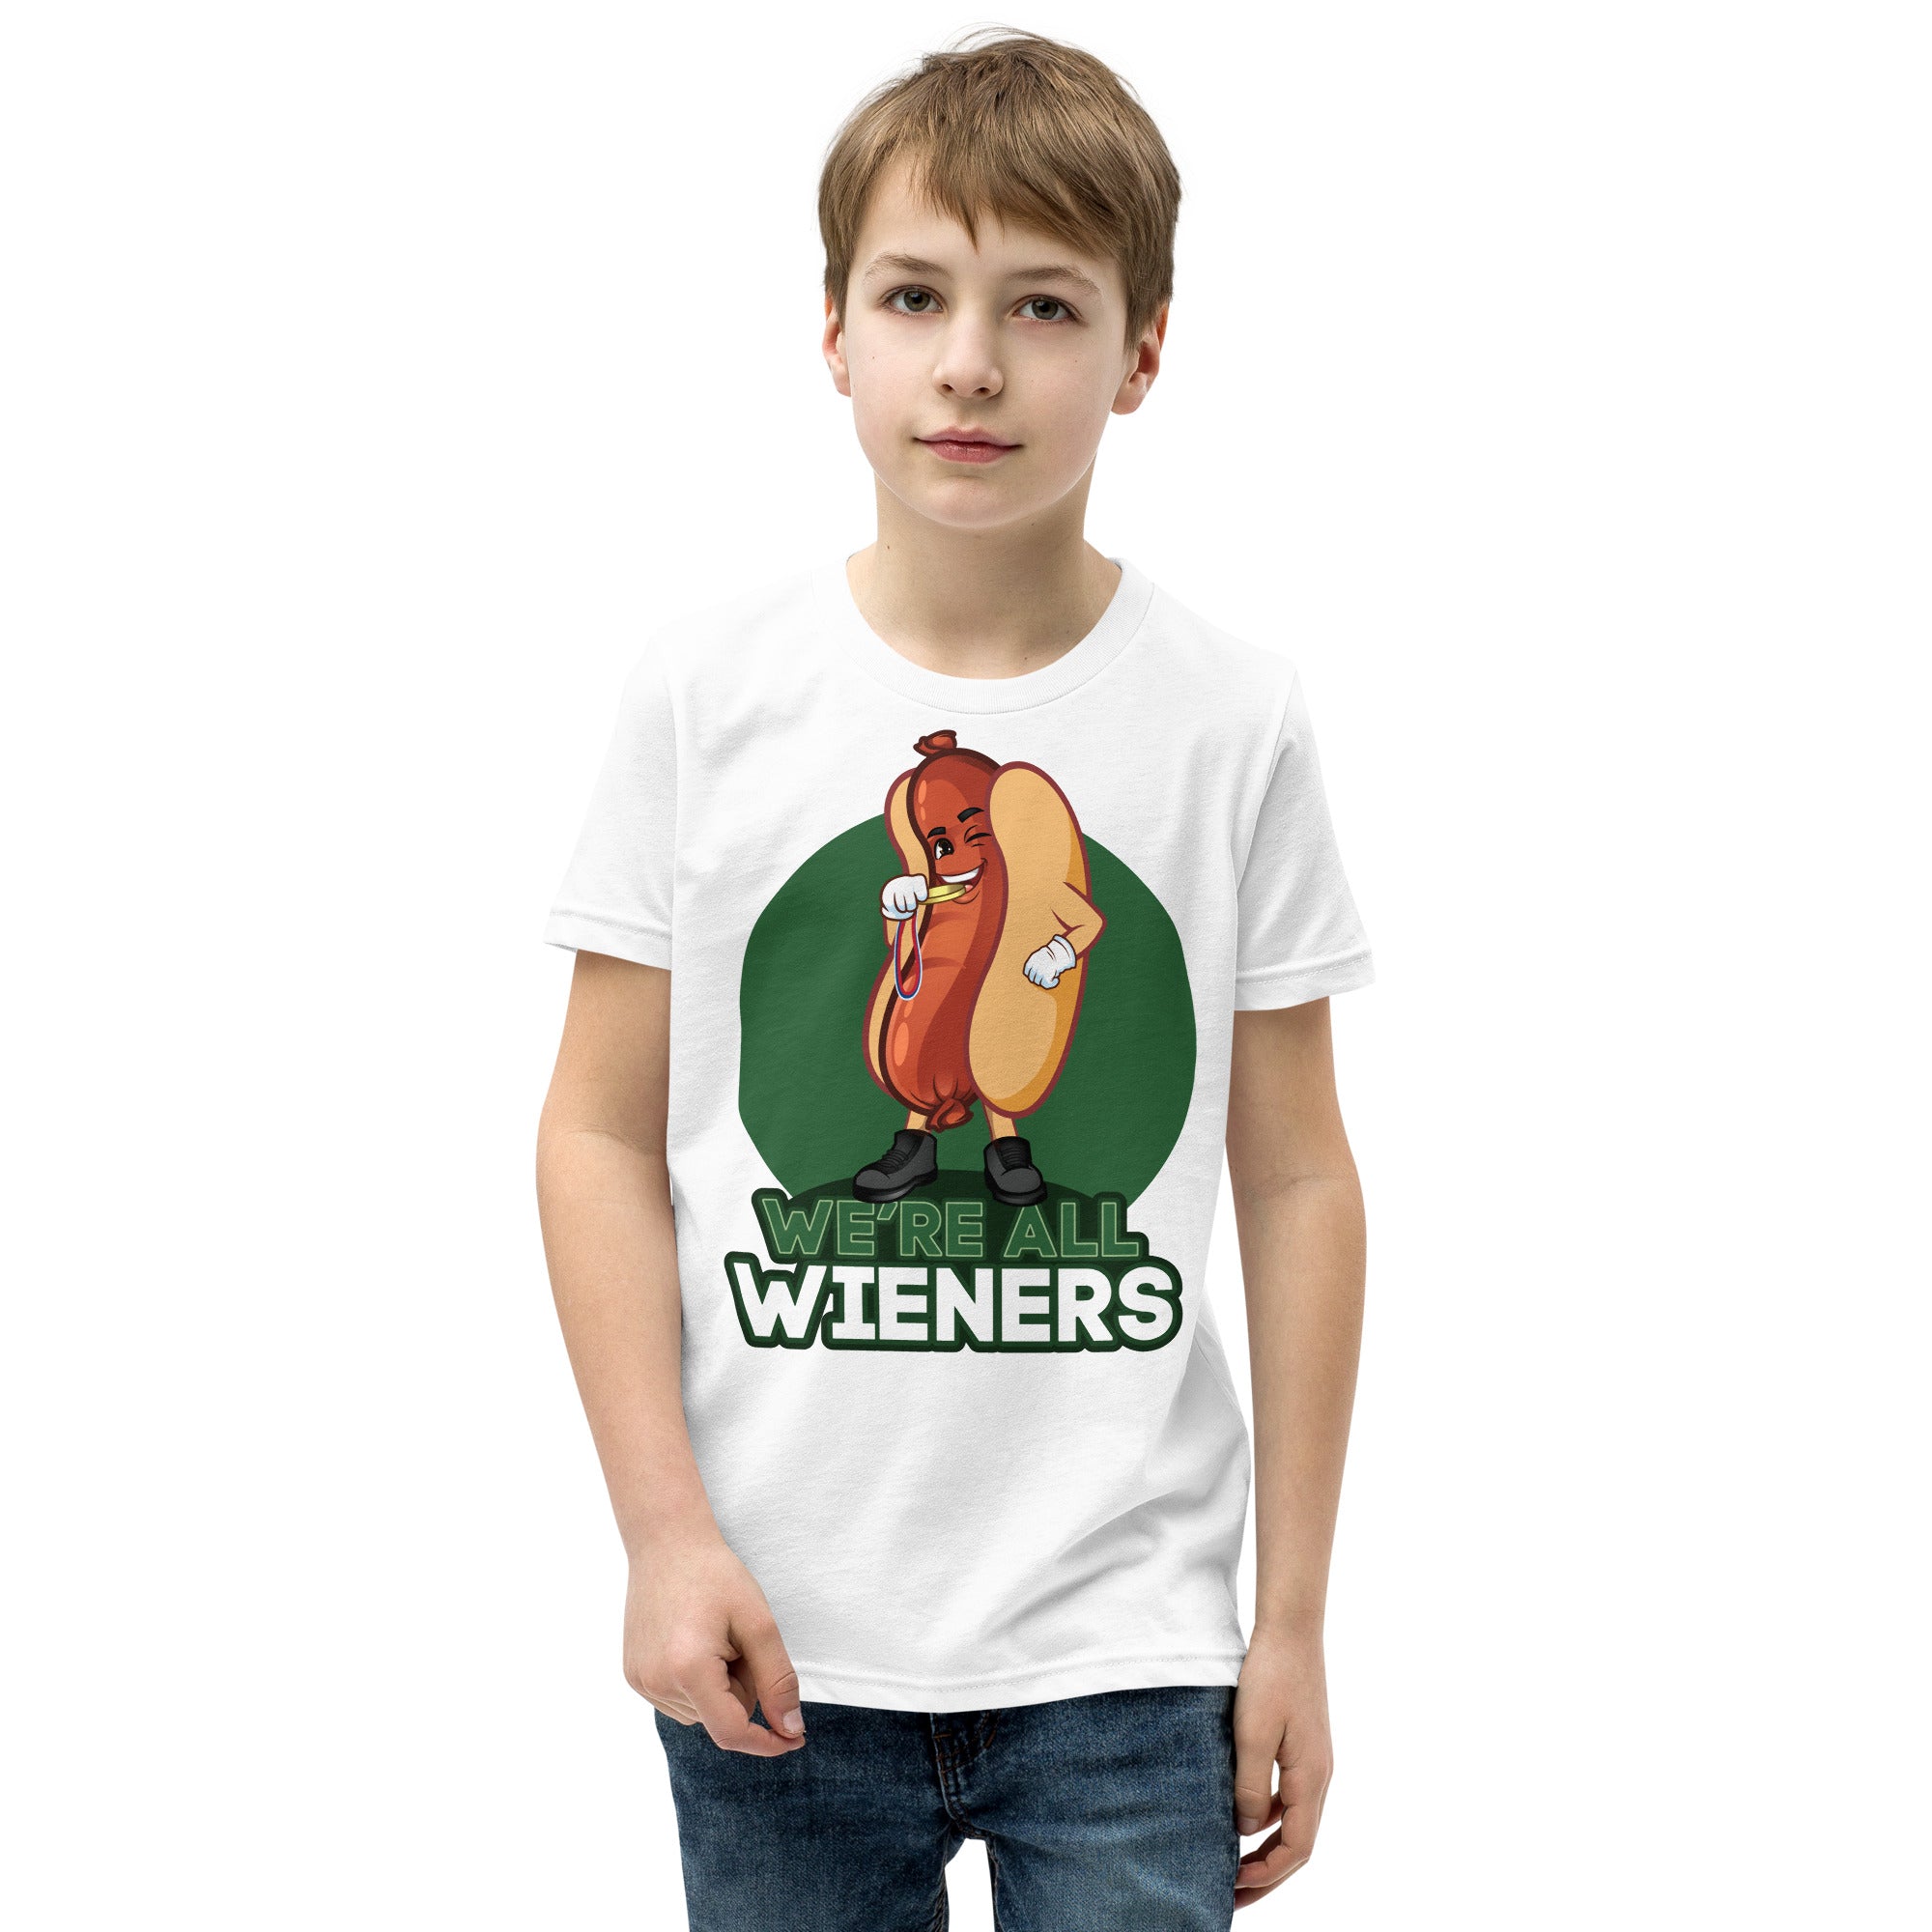 We're All Wieners - Youth Short Sleeve T-Shirt - Green